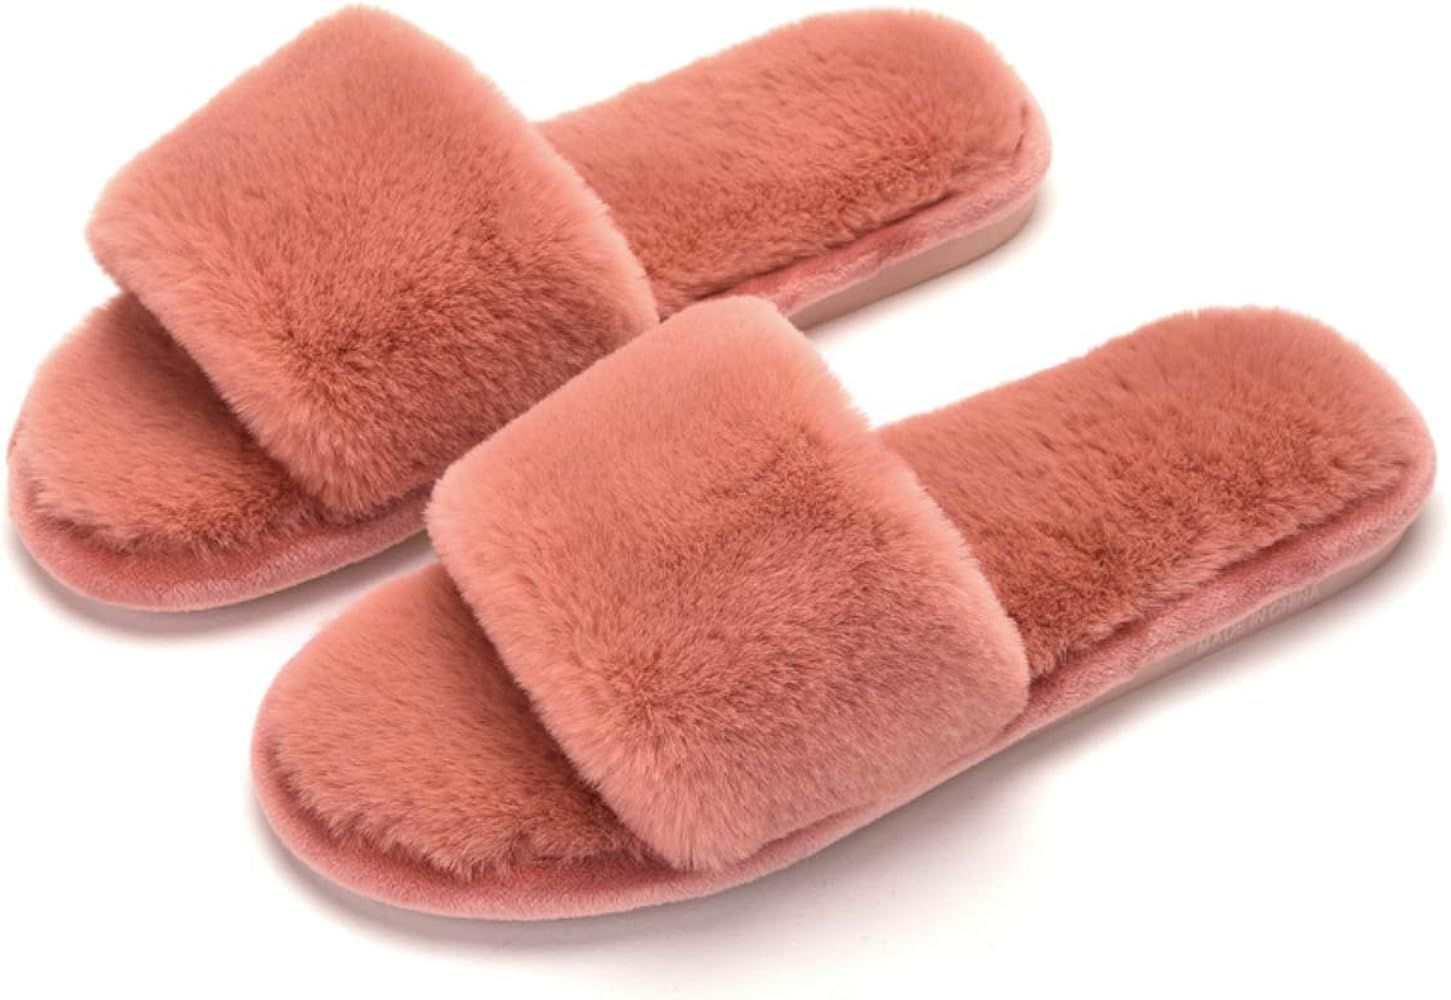 FIZILI Slippers for Women Fuzzy Cozy Furry Home Cute Fluffy Soft Sole Plush for House Indoor Outd... | Amazon (US)